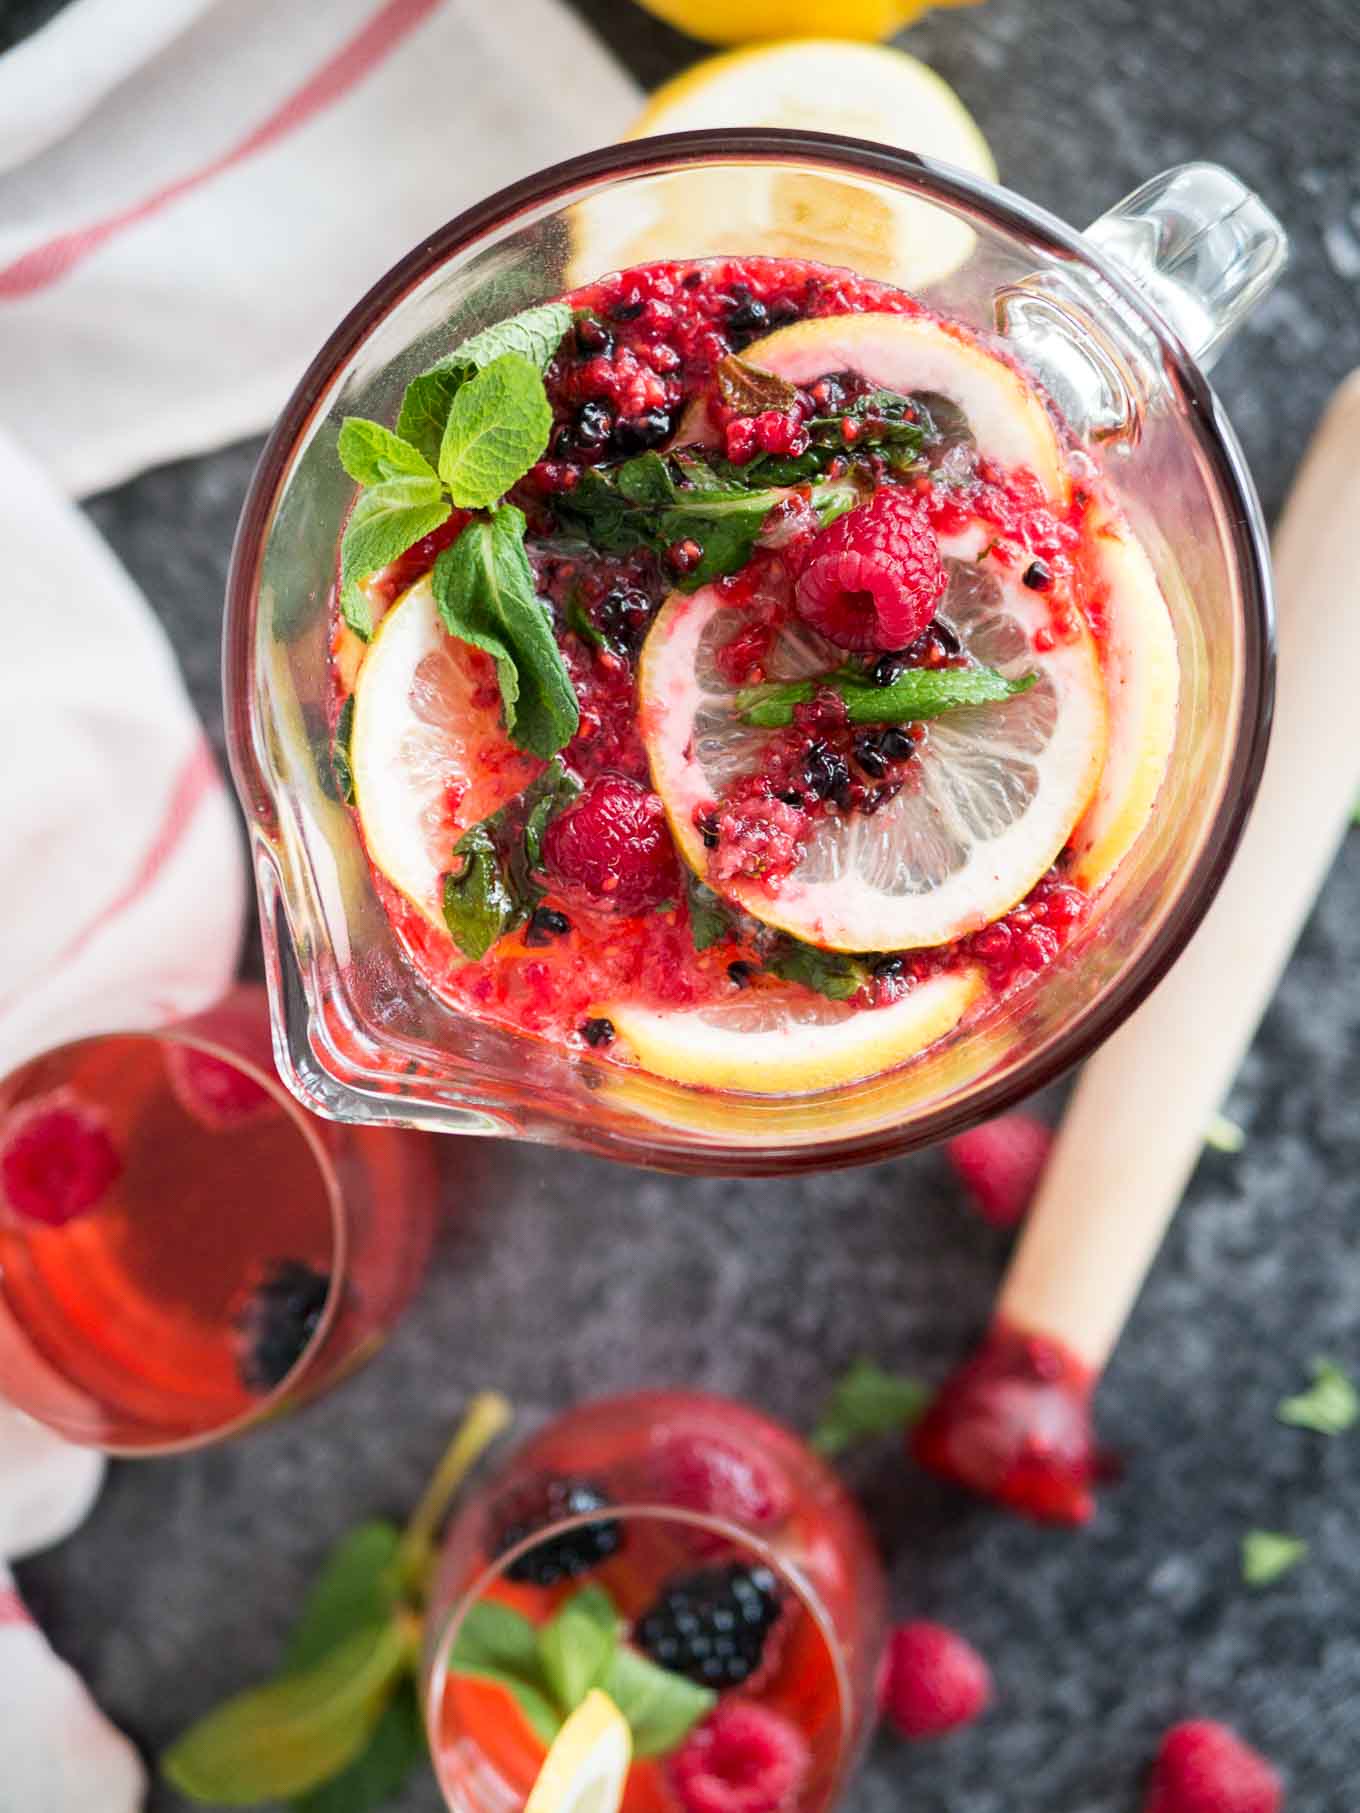 Top-down shot of a glass pitcher with homemade raspberry lemonade with lemon slices, mint and raspberries and blackberries. There are two glasses of the lemonade, a muddler, mint leaves and a white and red dishtowel next to it.